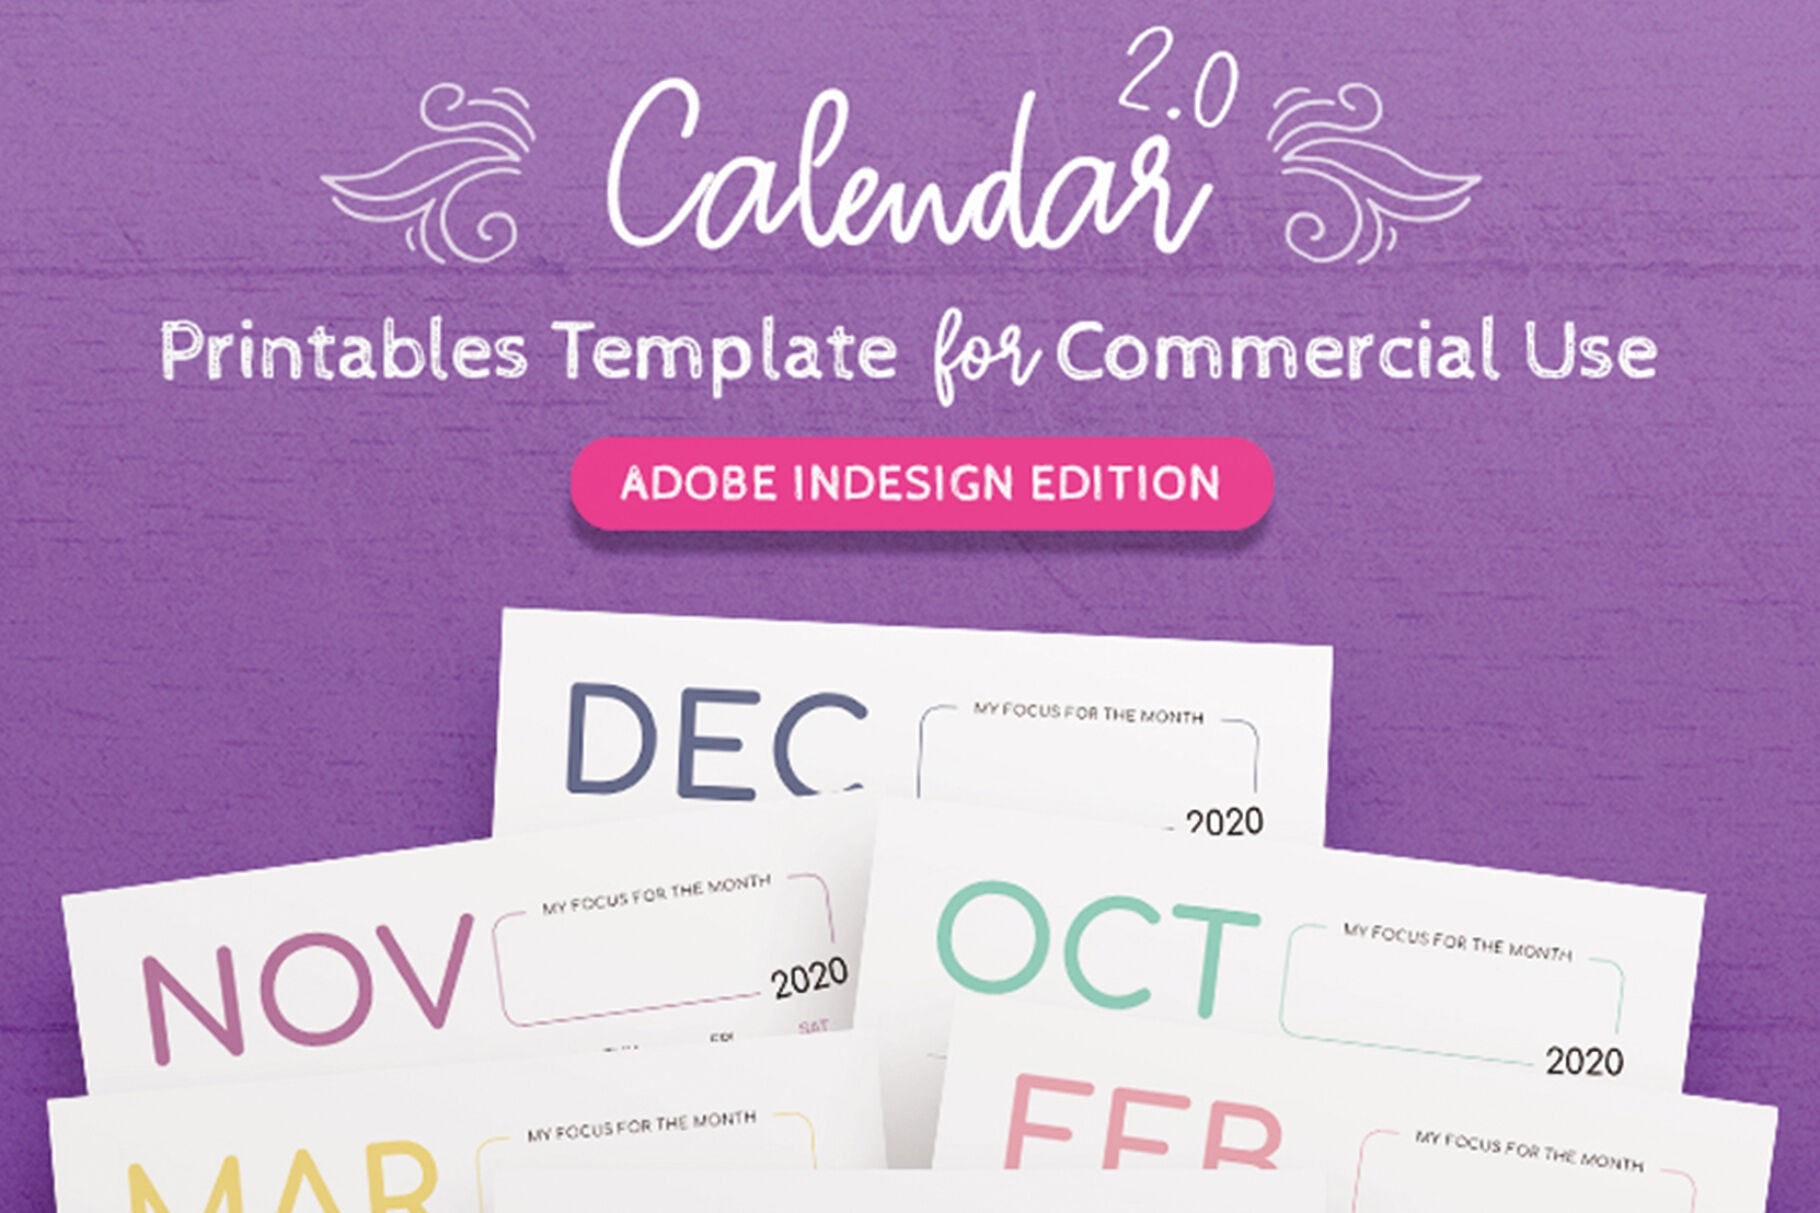 2020 Calendar Indesign Template For Commercial Use By Janice-2020 Calendar Template Indesign